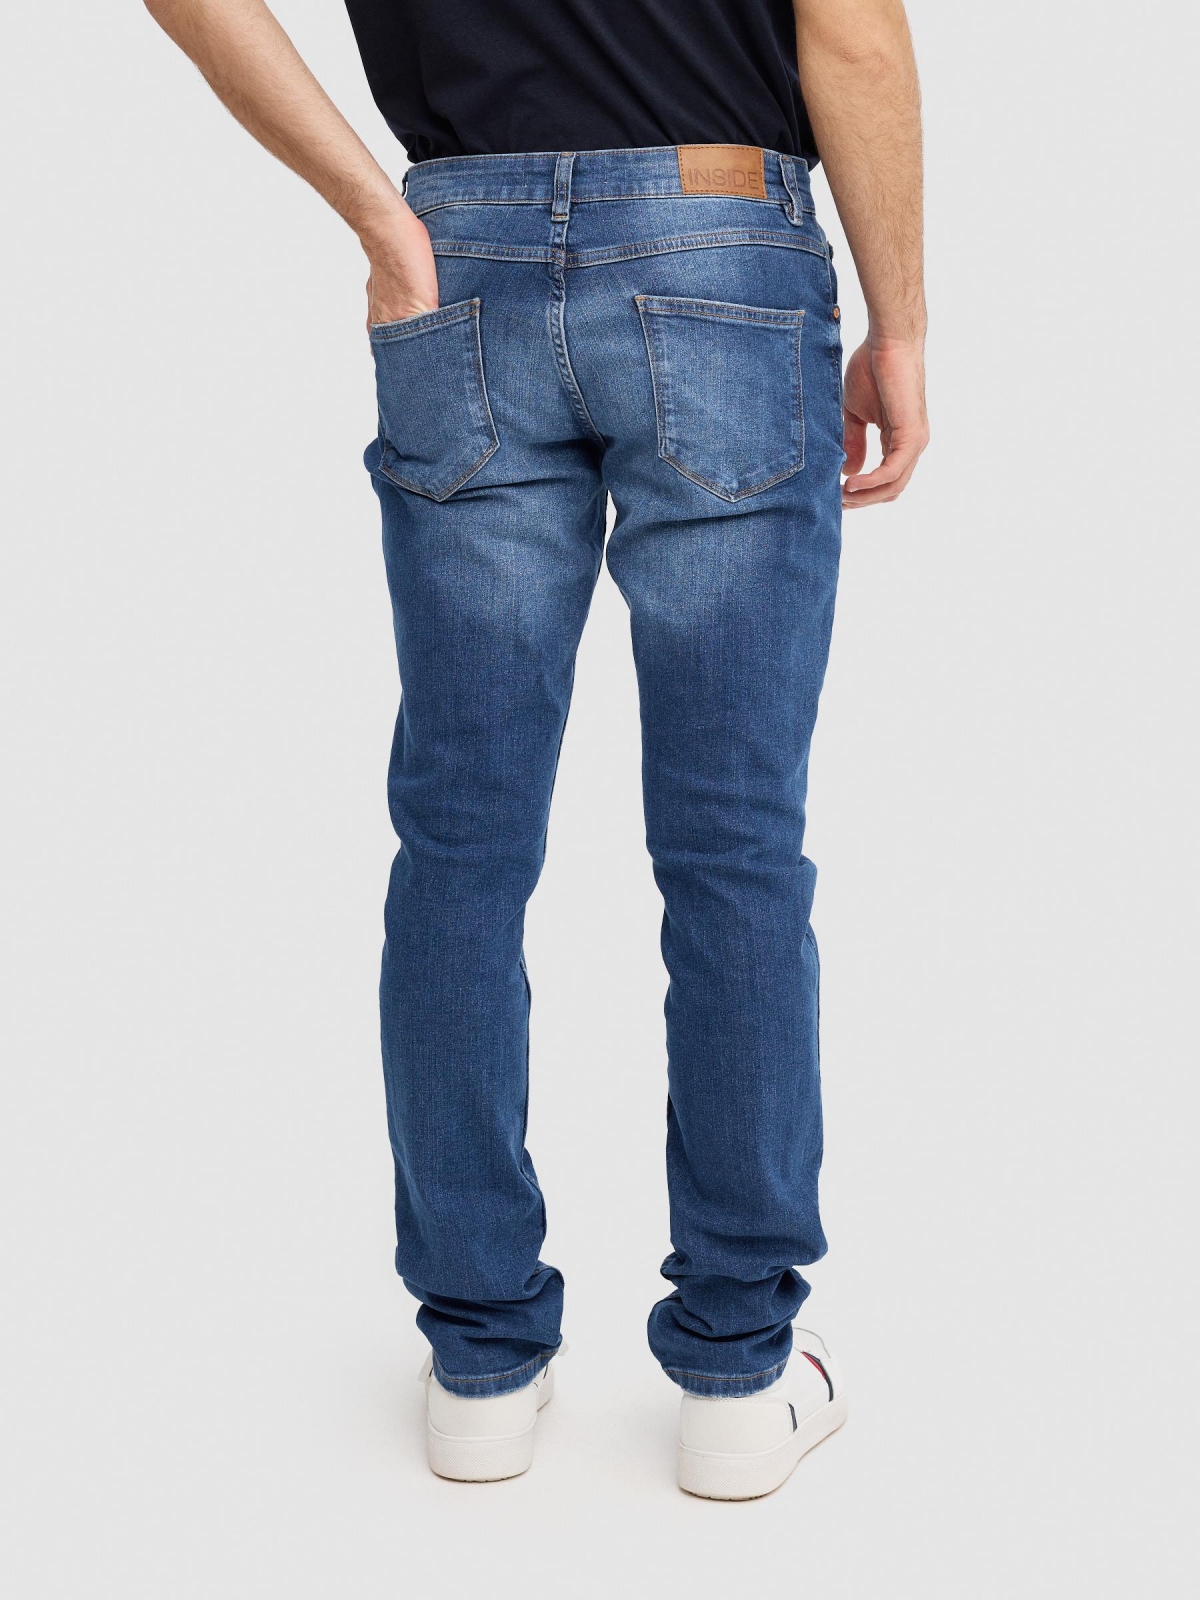 Indigo thigh washed slim jeans blue middle back view